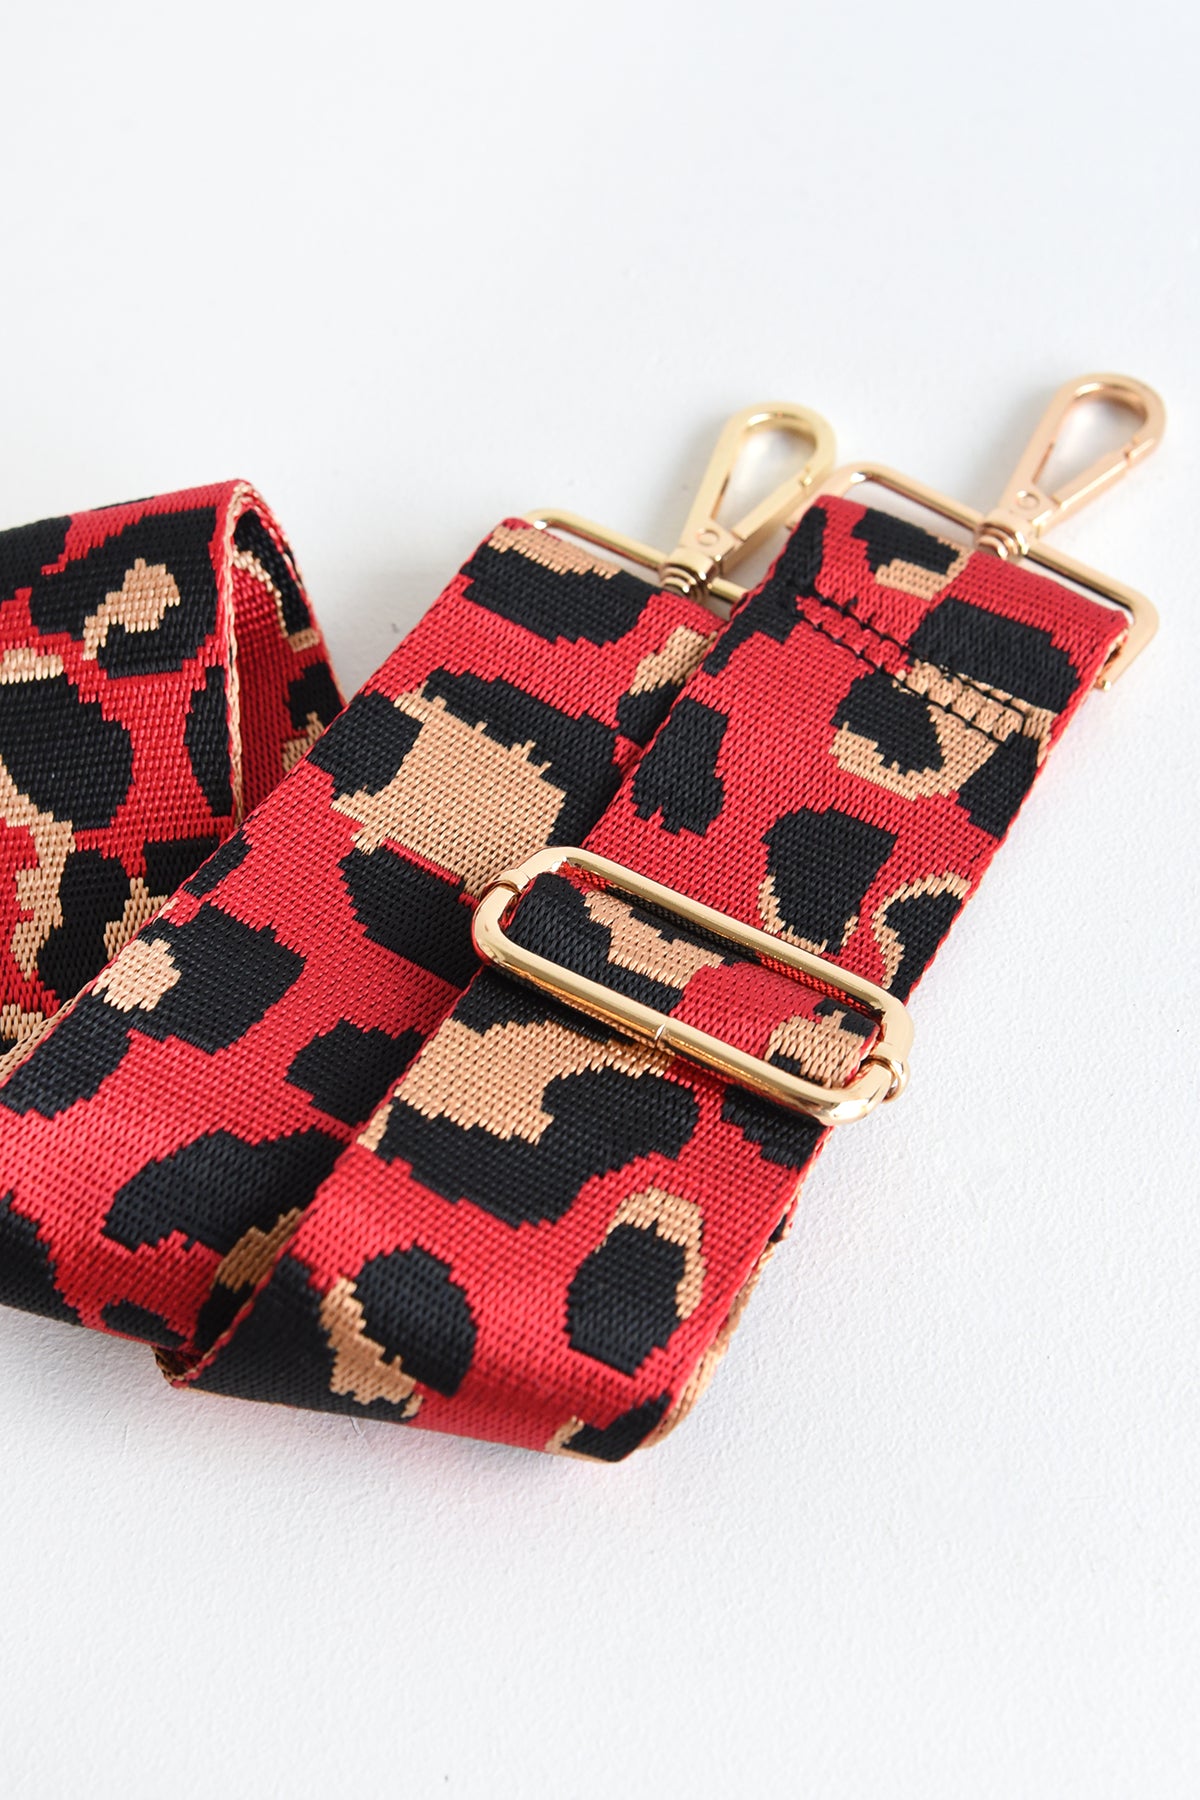 AHDORNED RED LEOPARD STRAP